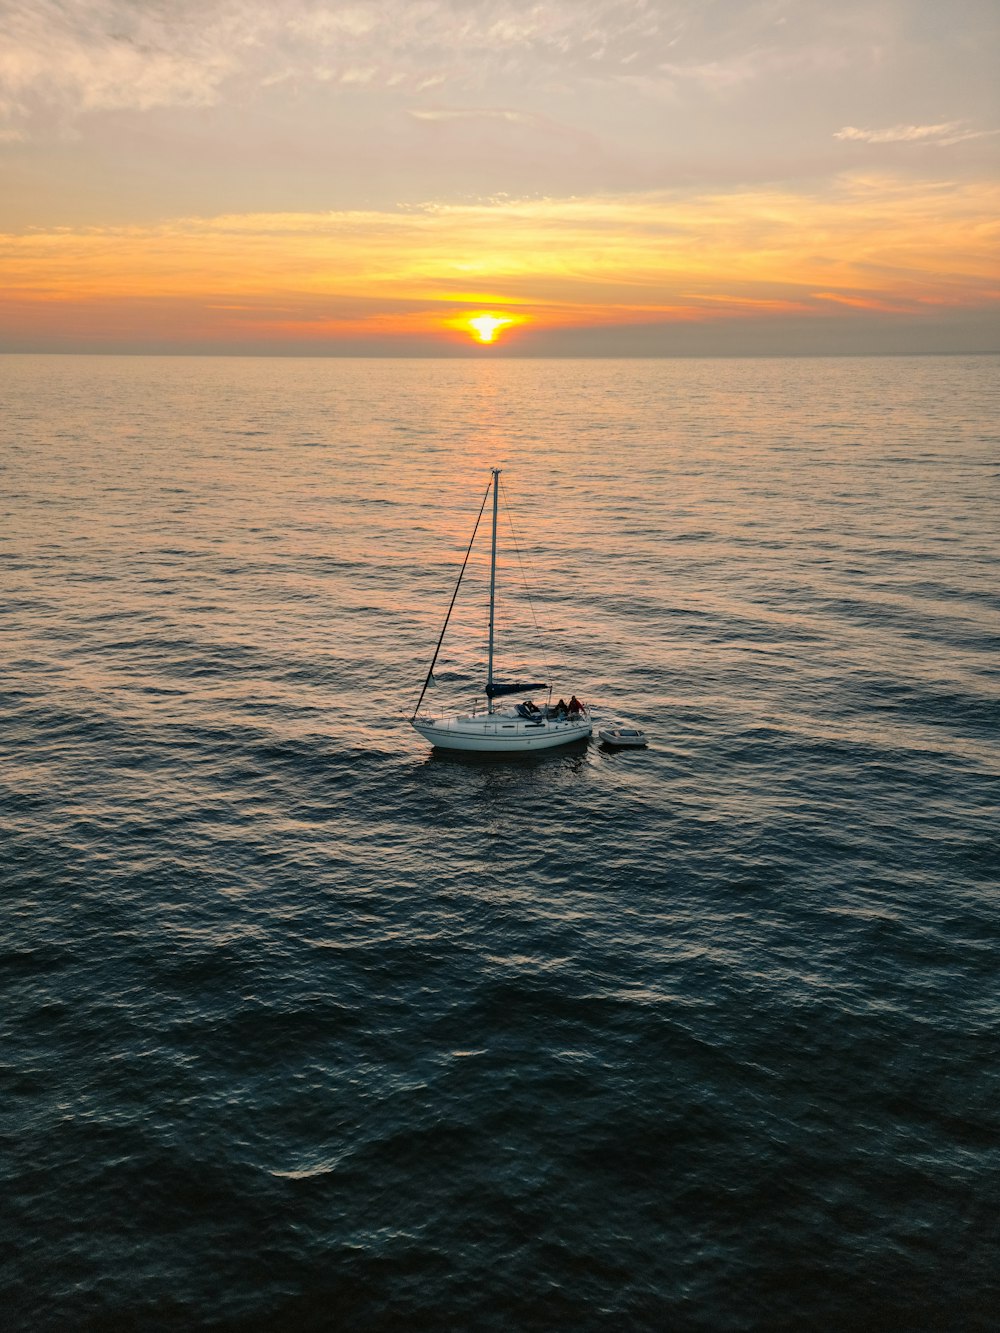 a sailboat in the middle of the ocean at sunset